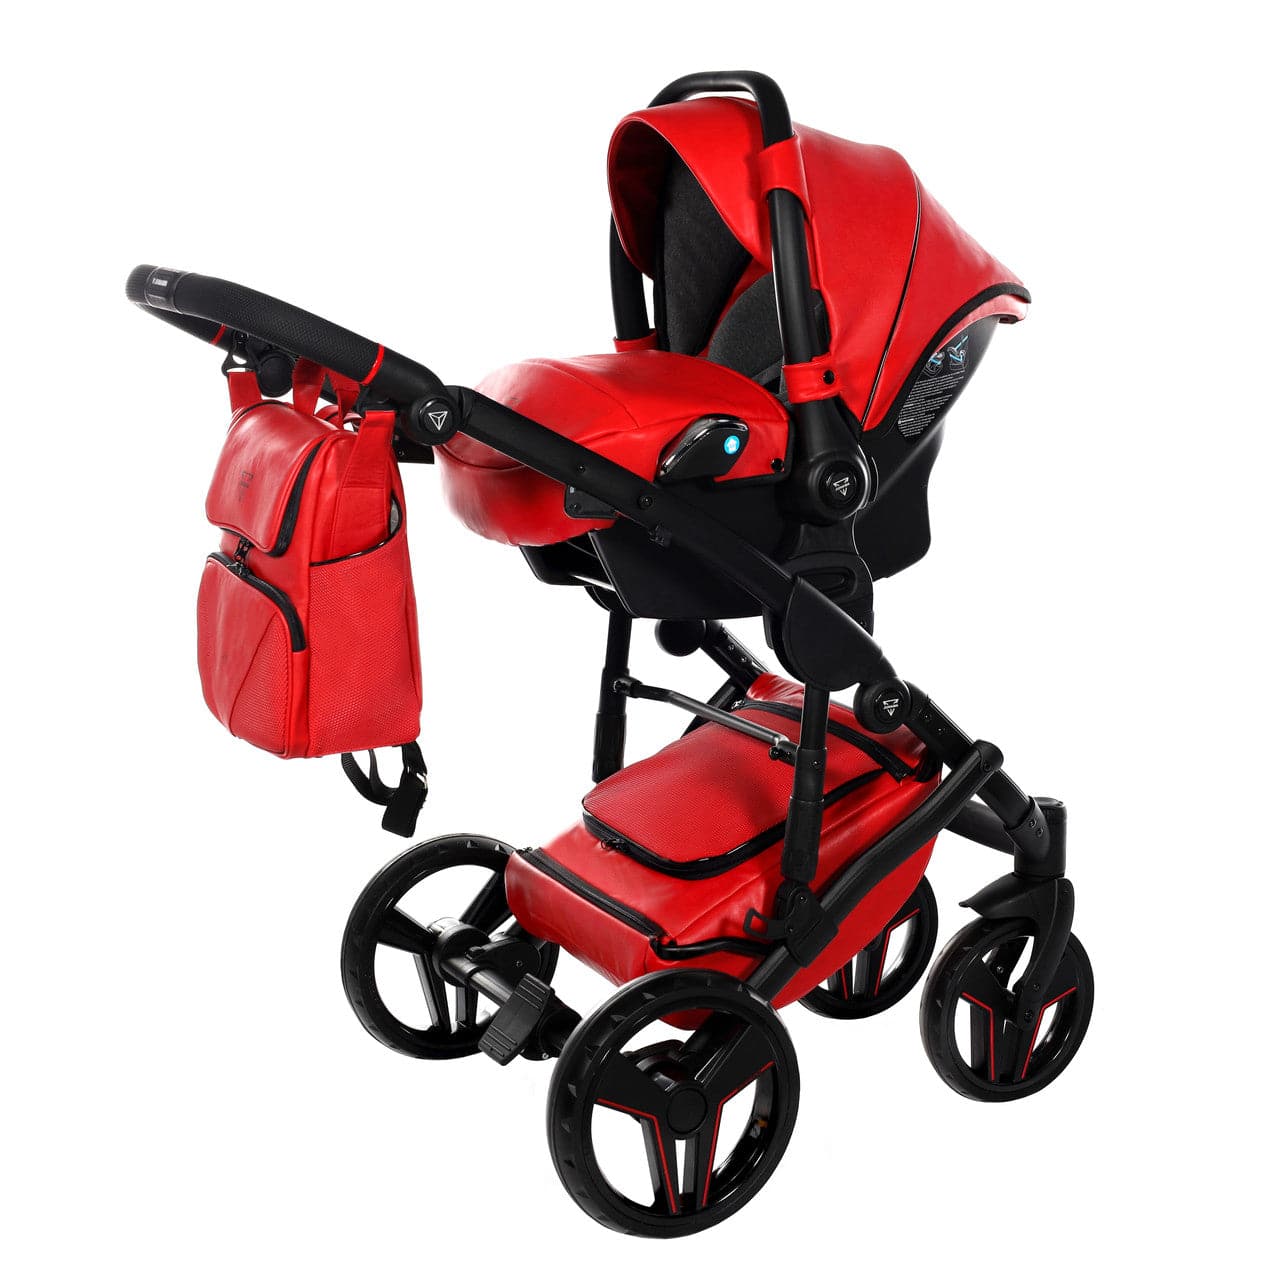 Junama S-Class 3 In 1 Travel System - Red -  | For Your Little One